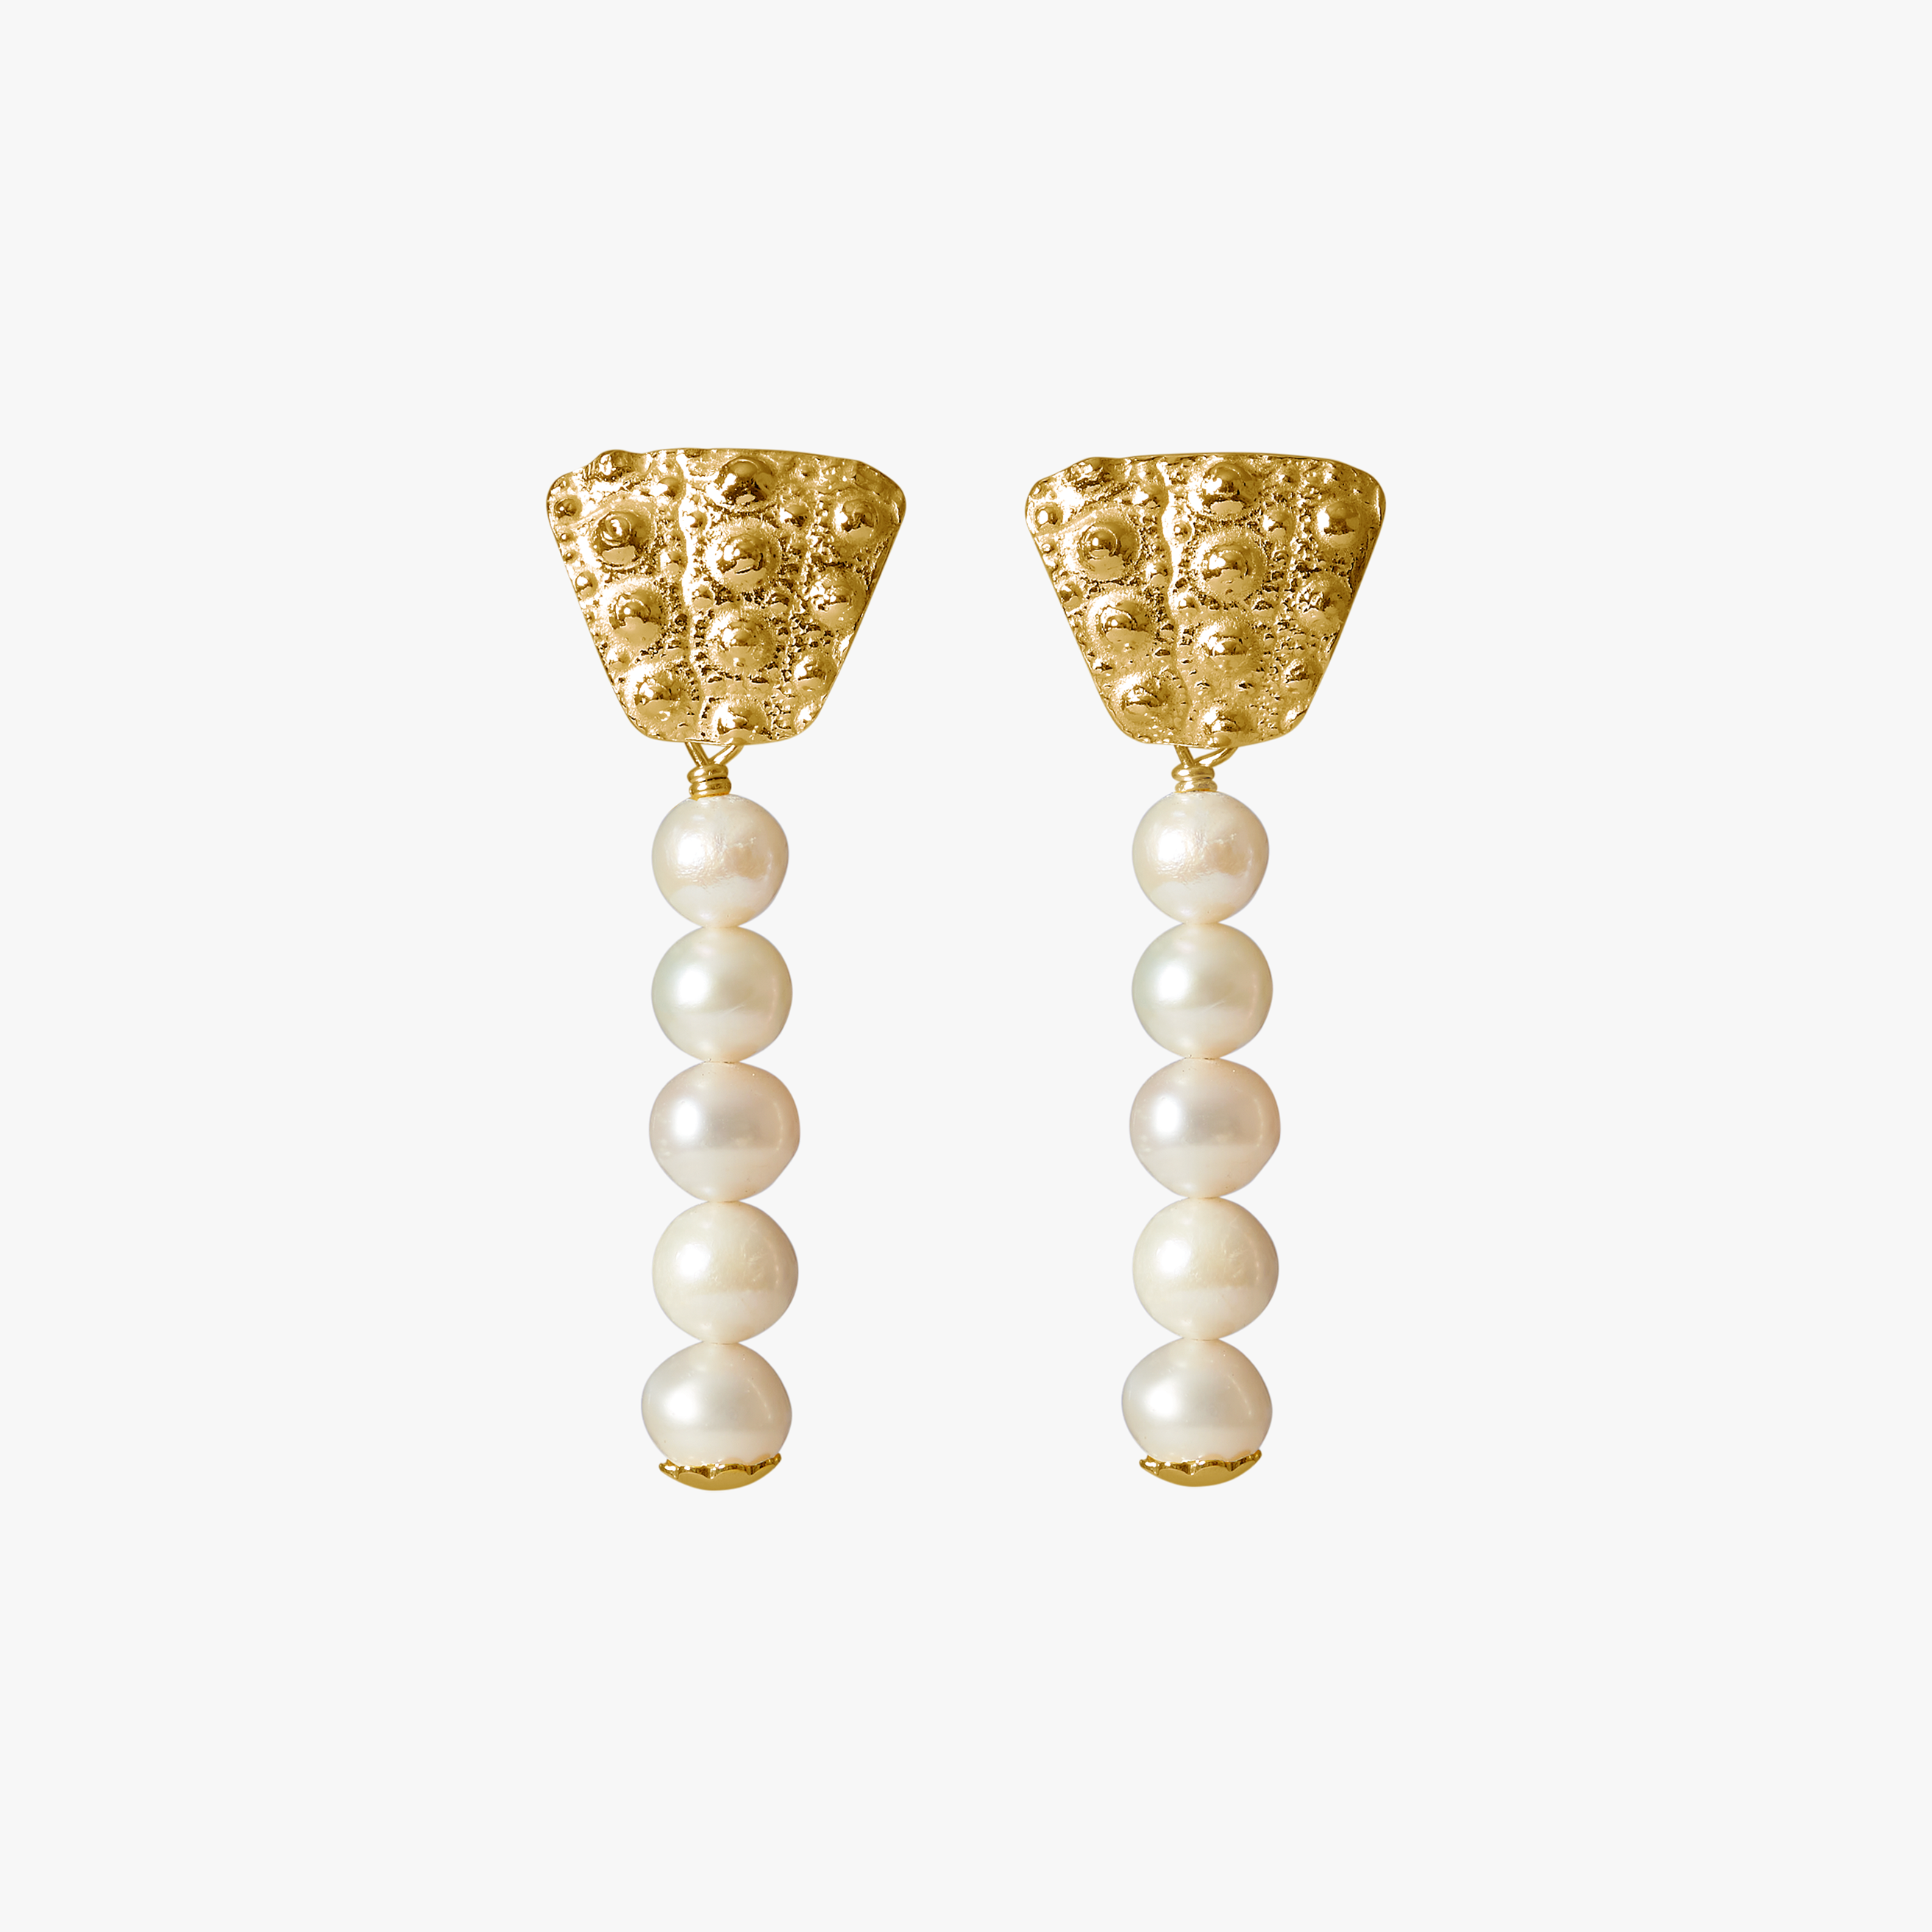 Grand Gaube Gold with 5 pearls - Oceano Pearls